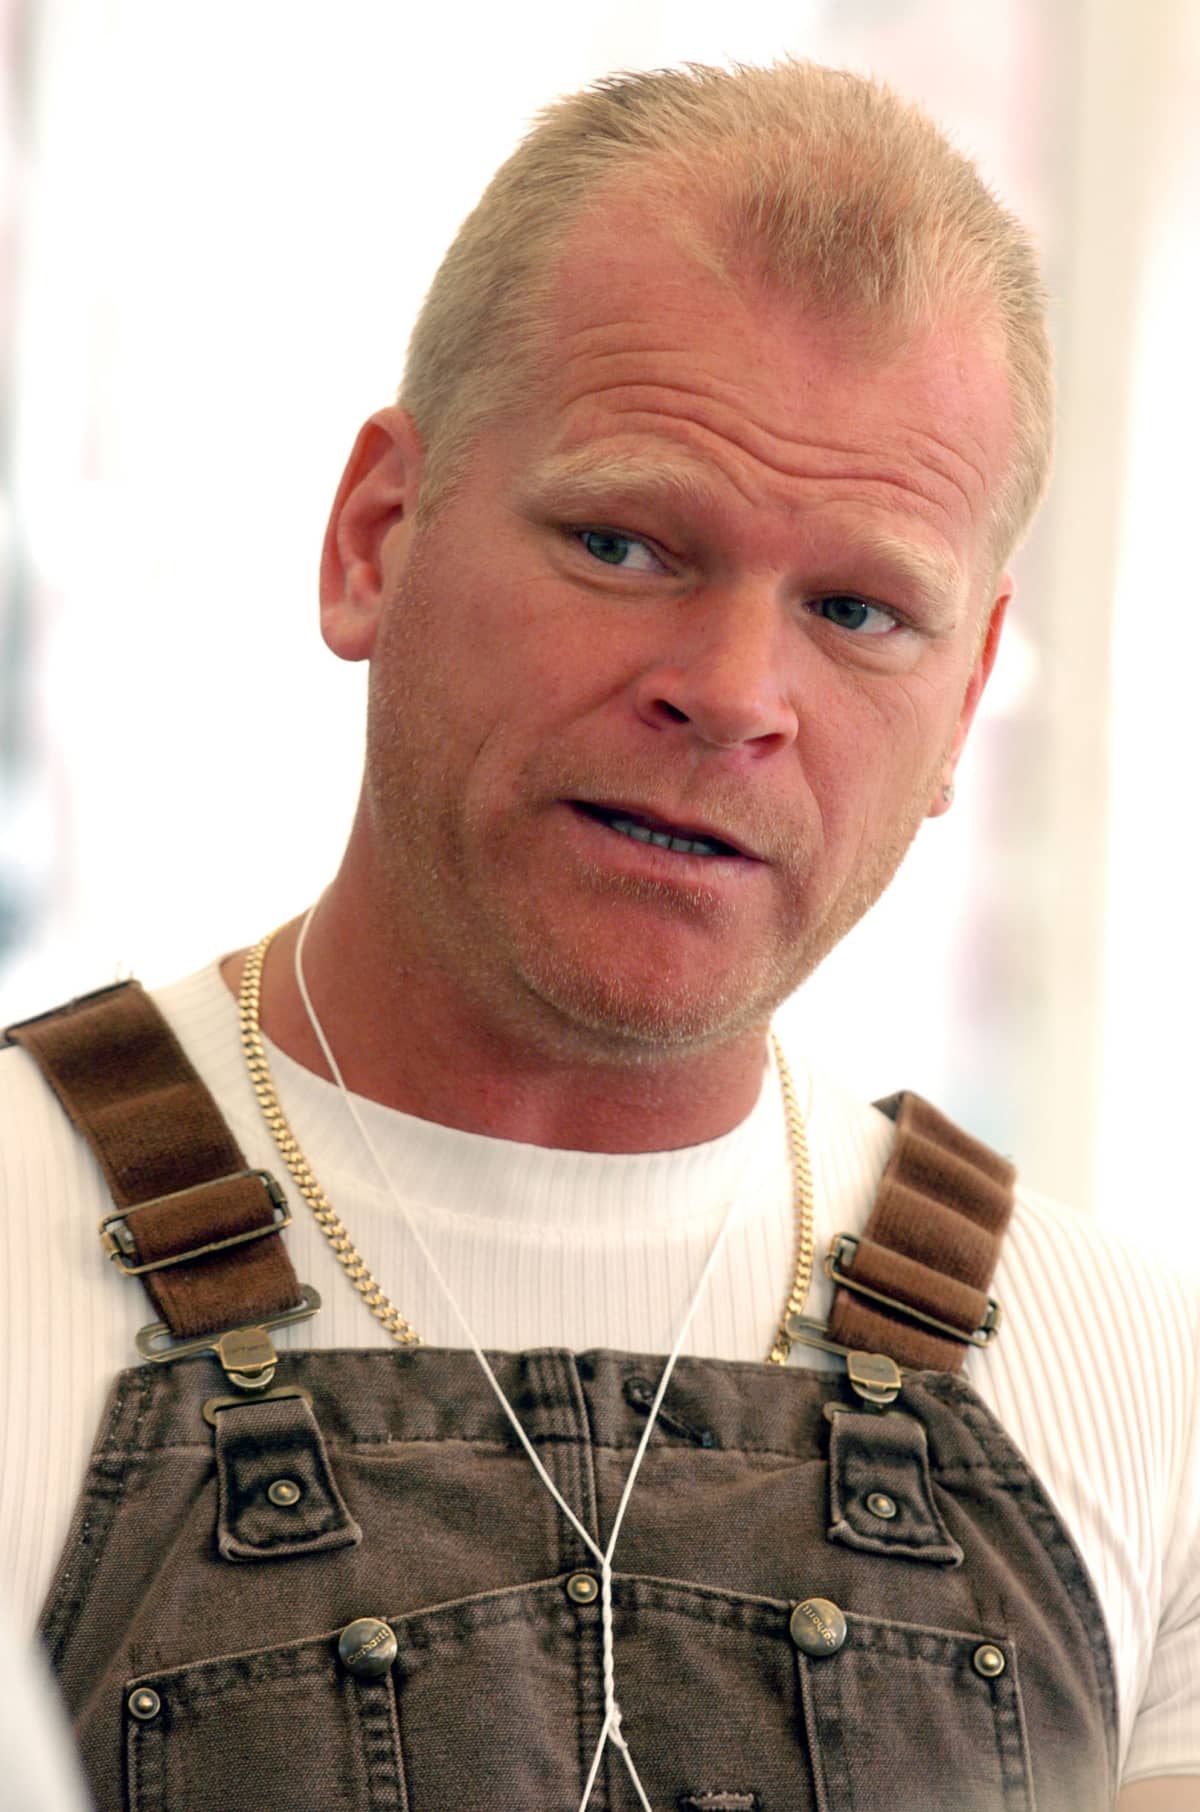 Renovation expert and HGTV host Mike Holmes at an event